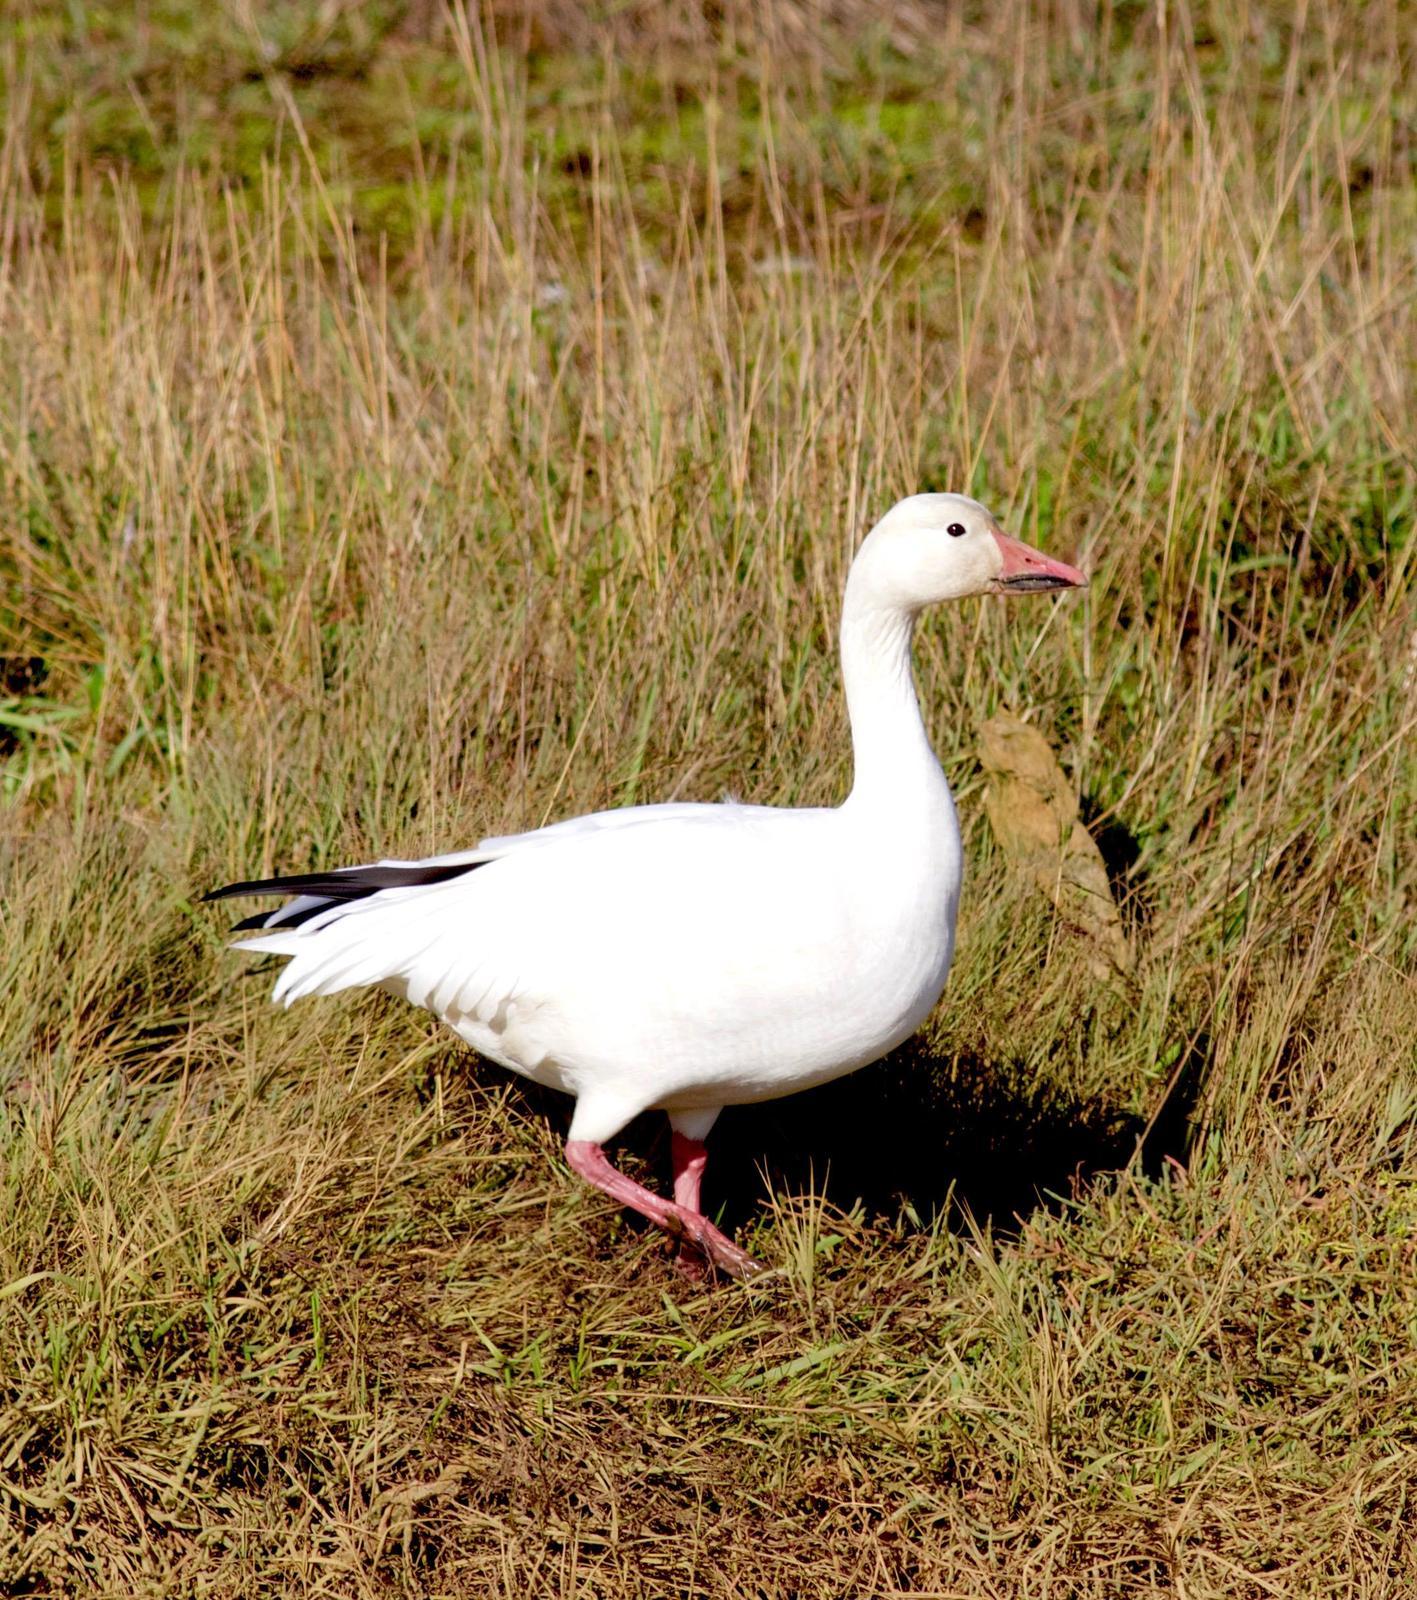 Snow Goose Photo by Kathryn Keith